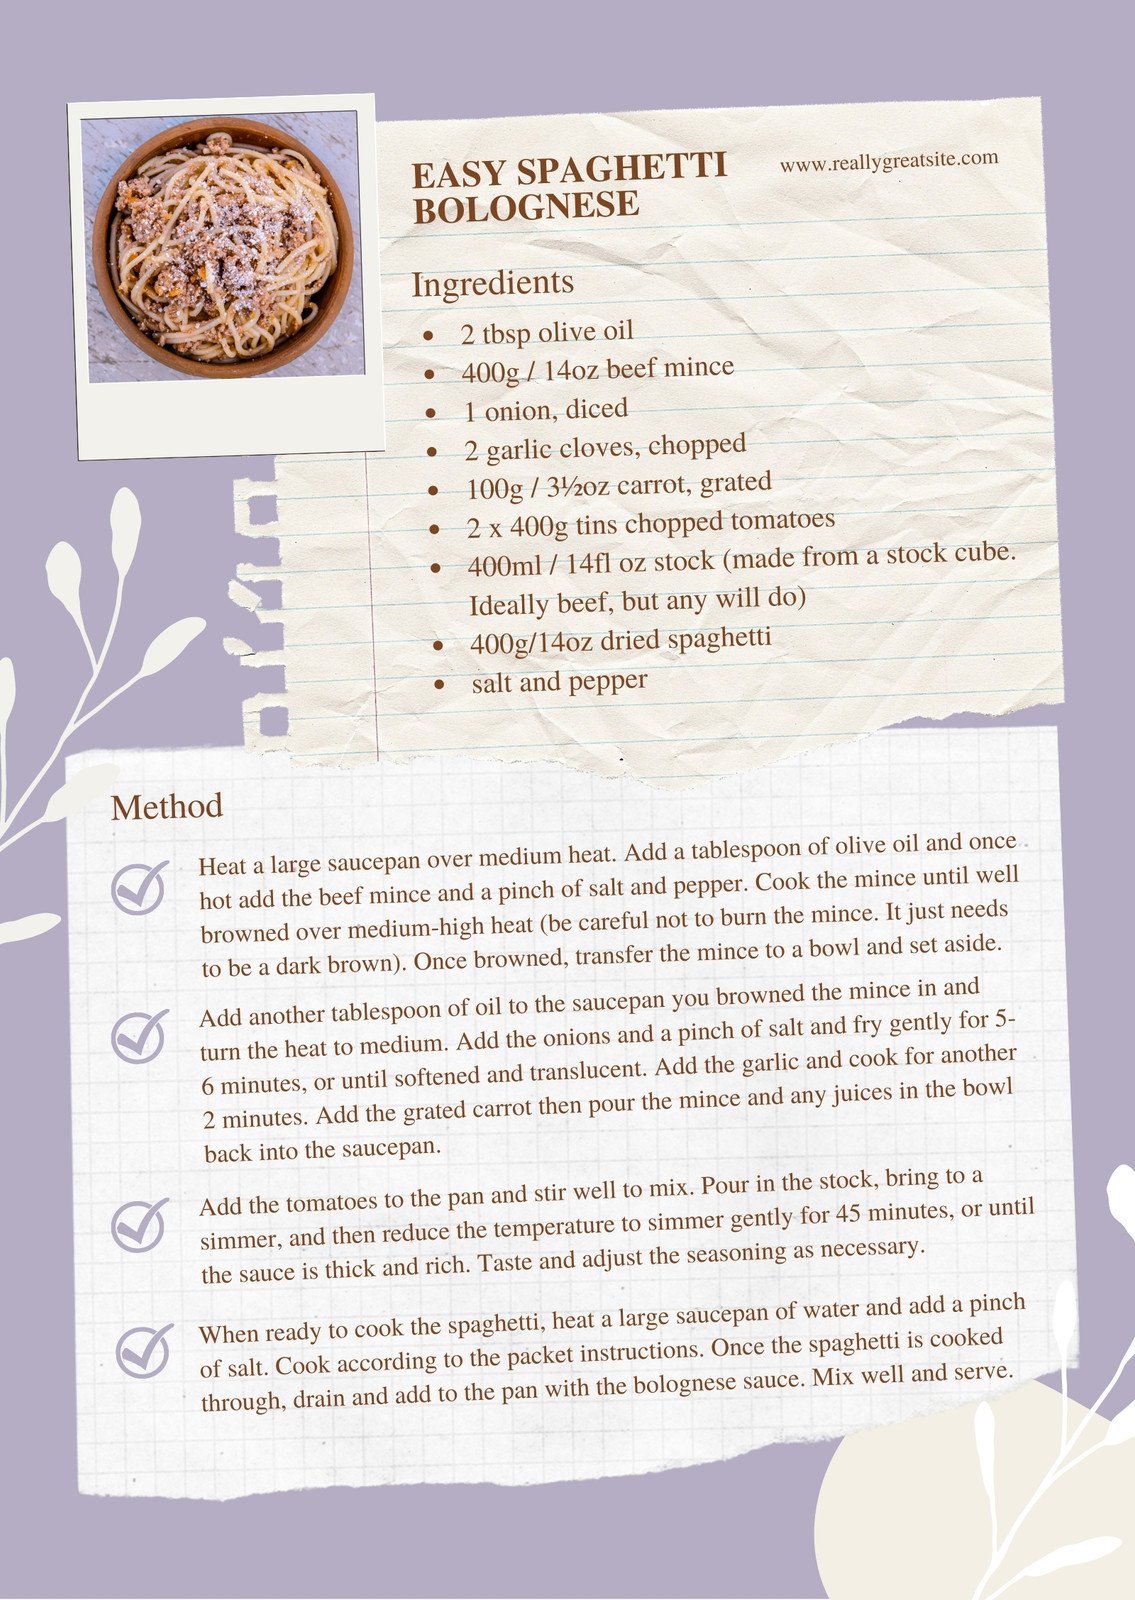 Free Printable Recipe Cards - The Crafted Life